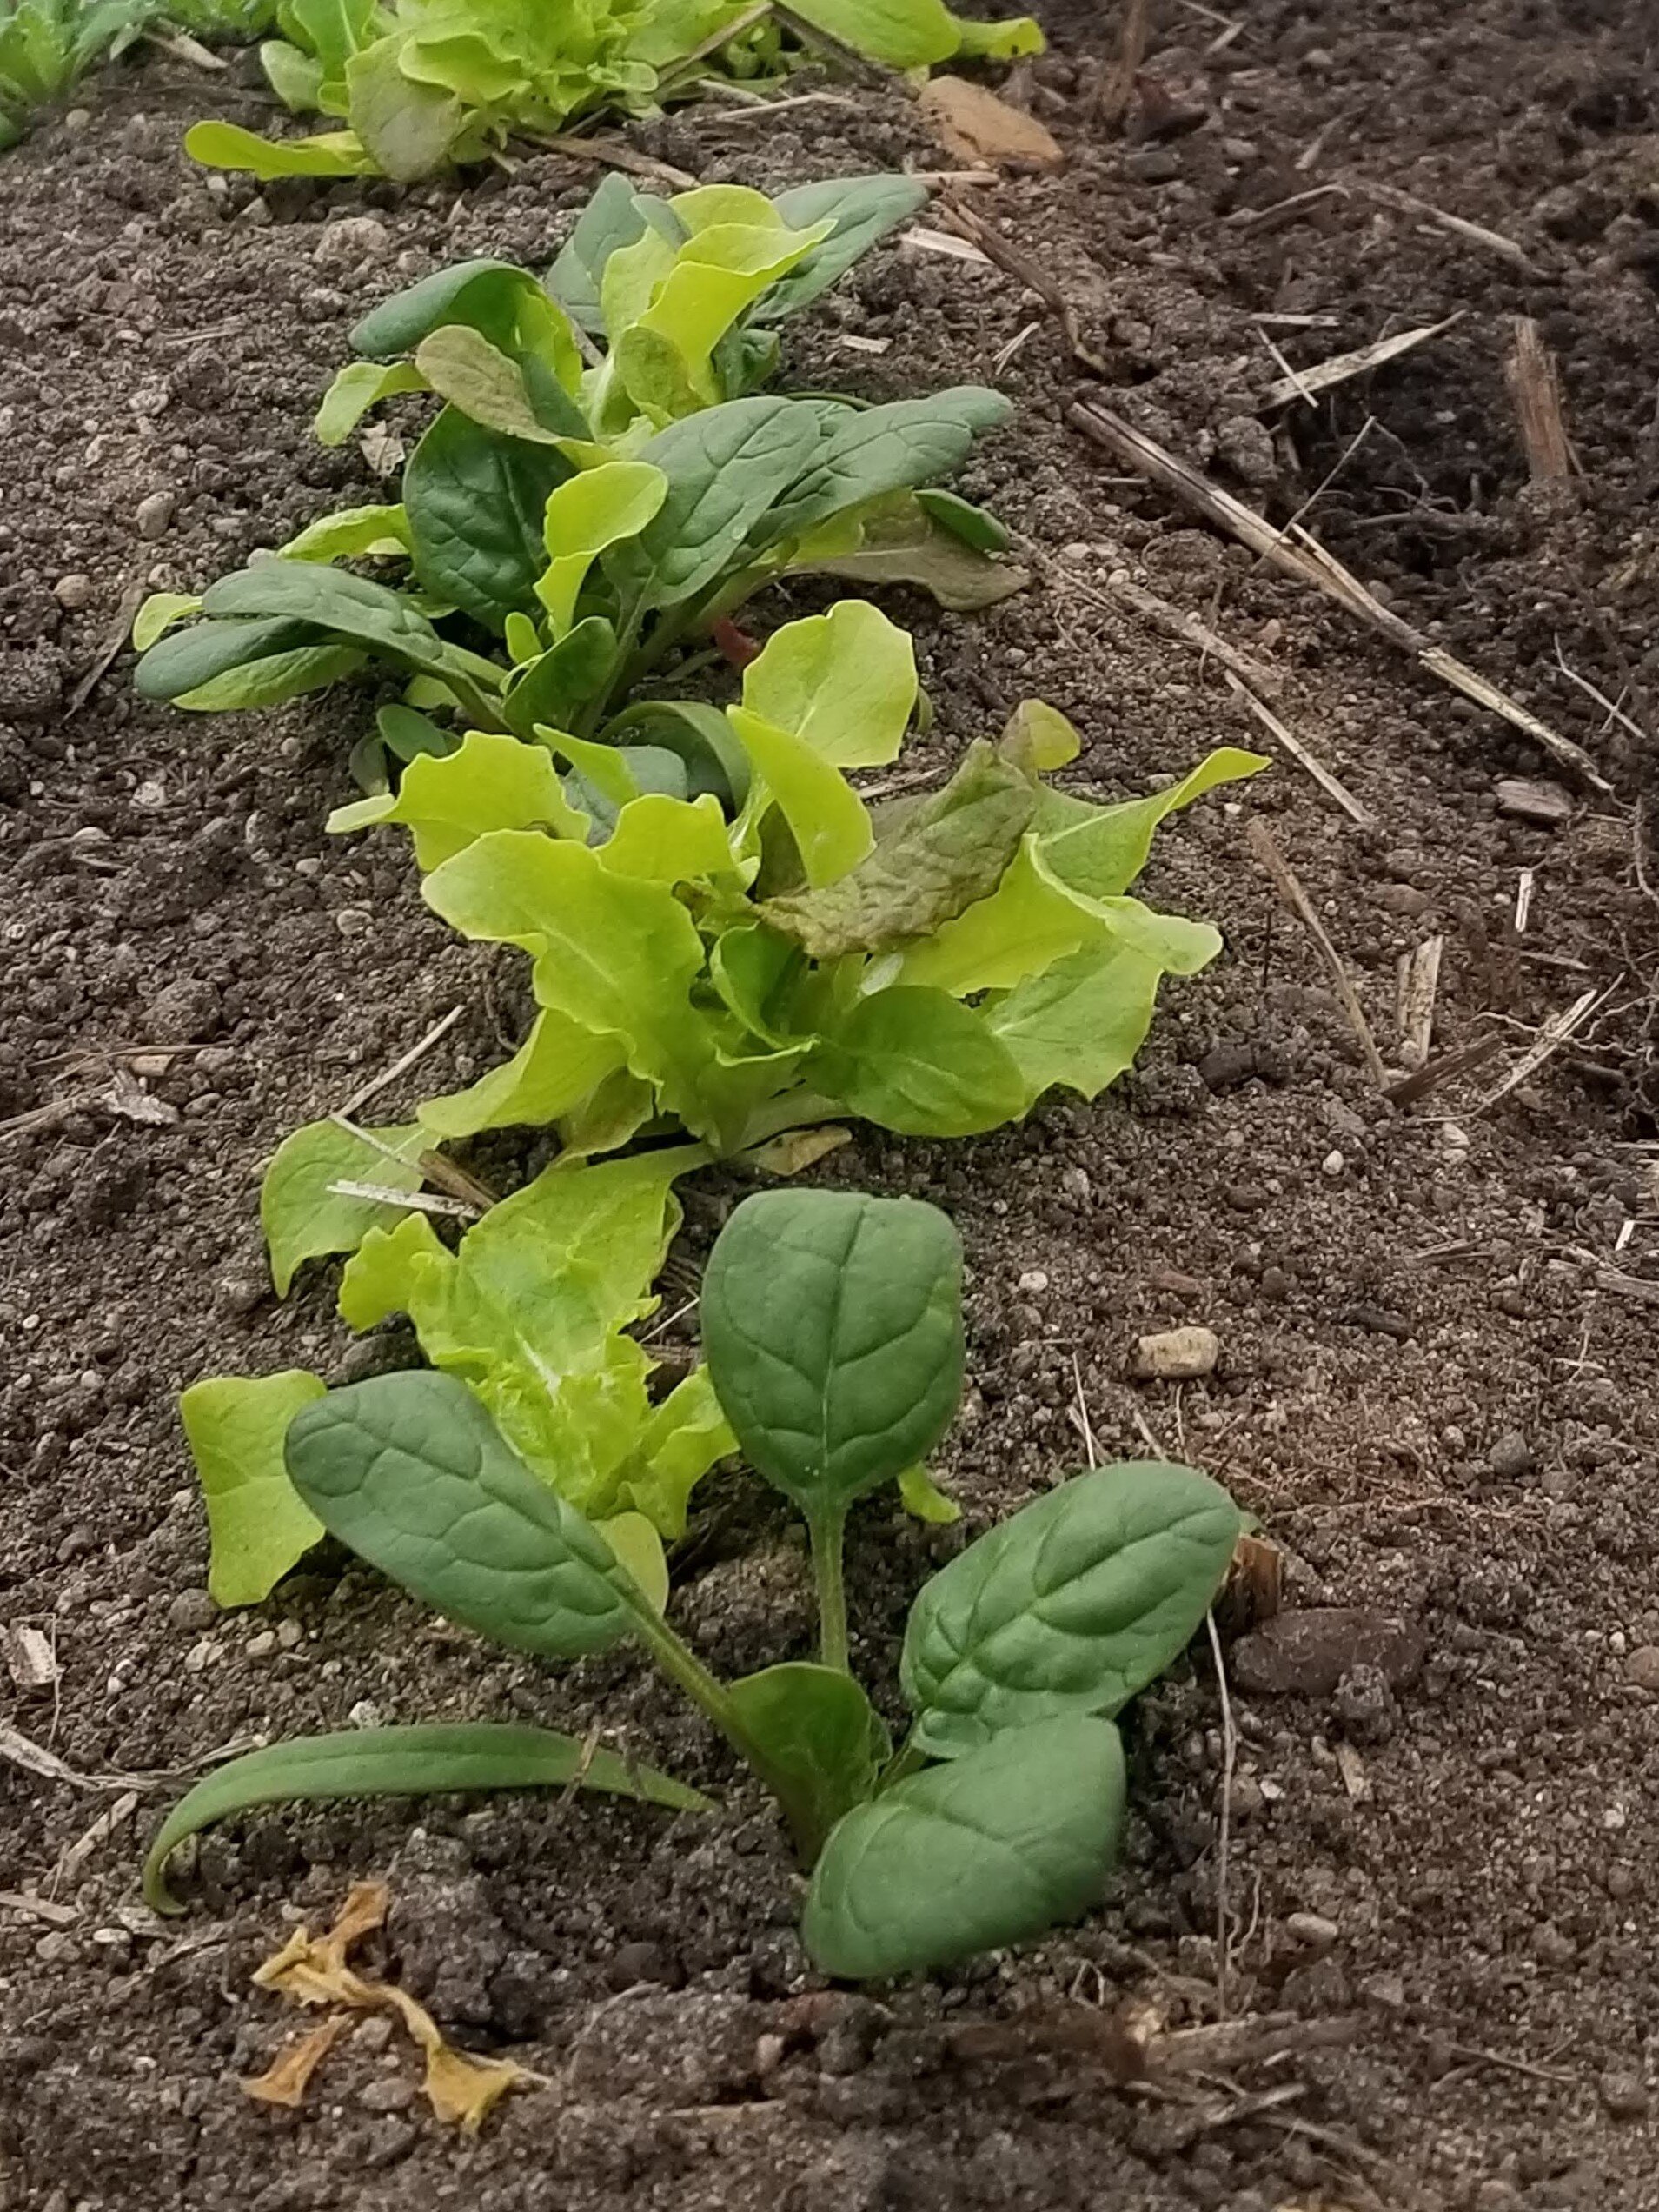 02.28.20: Spinach and lettuce planted 10.26.19